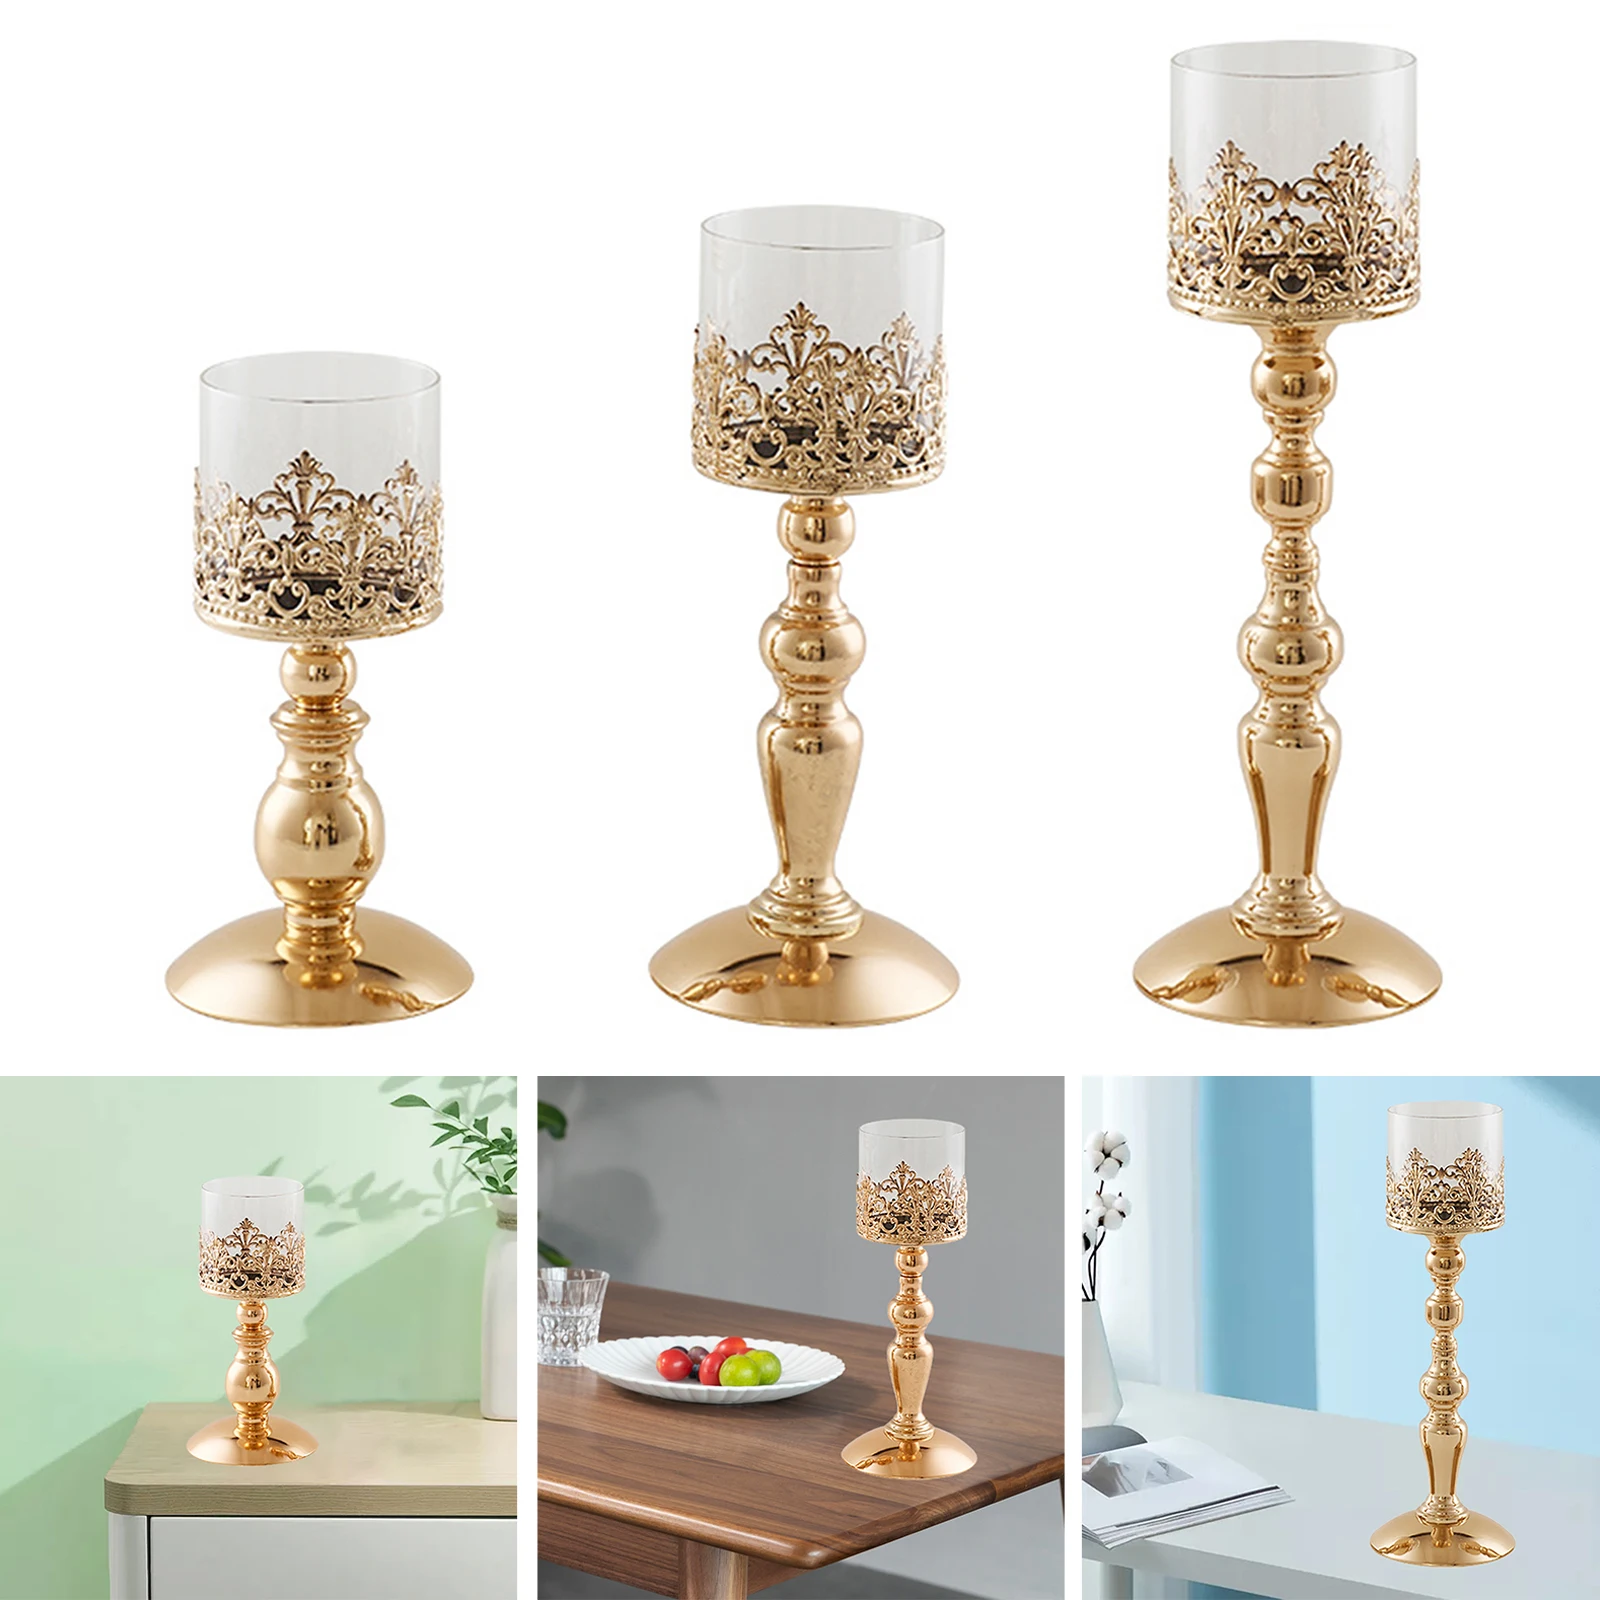 Modern House Decor Gifts for Anniversary Celebration-S Luxury Gold Candle Holder Elegant Tealight Holders Wedding Centerpieces Candlestick Holders Candelabra Dining Room Coffee Table Centerpiece 